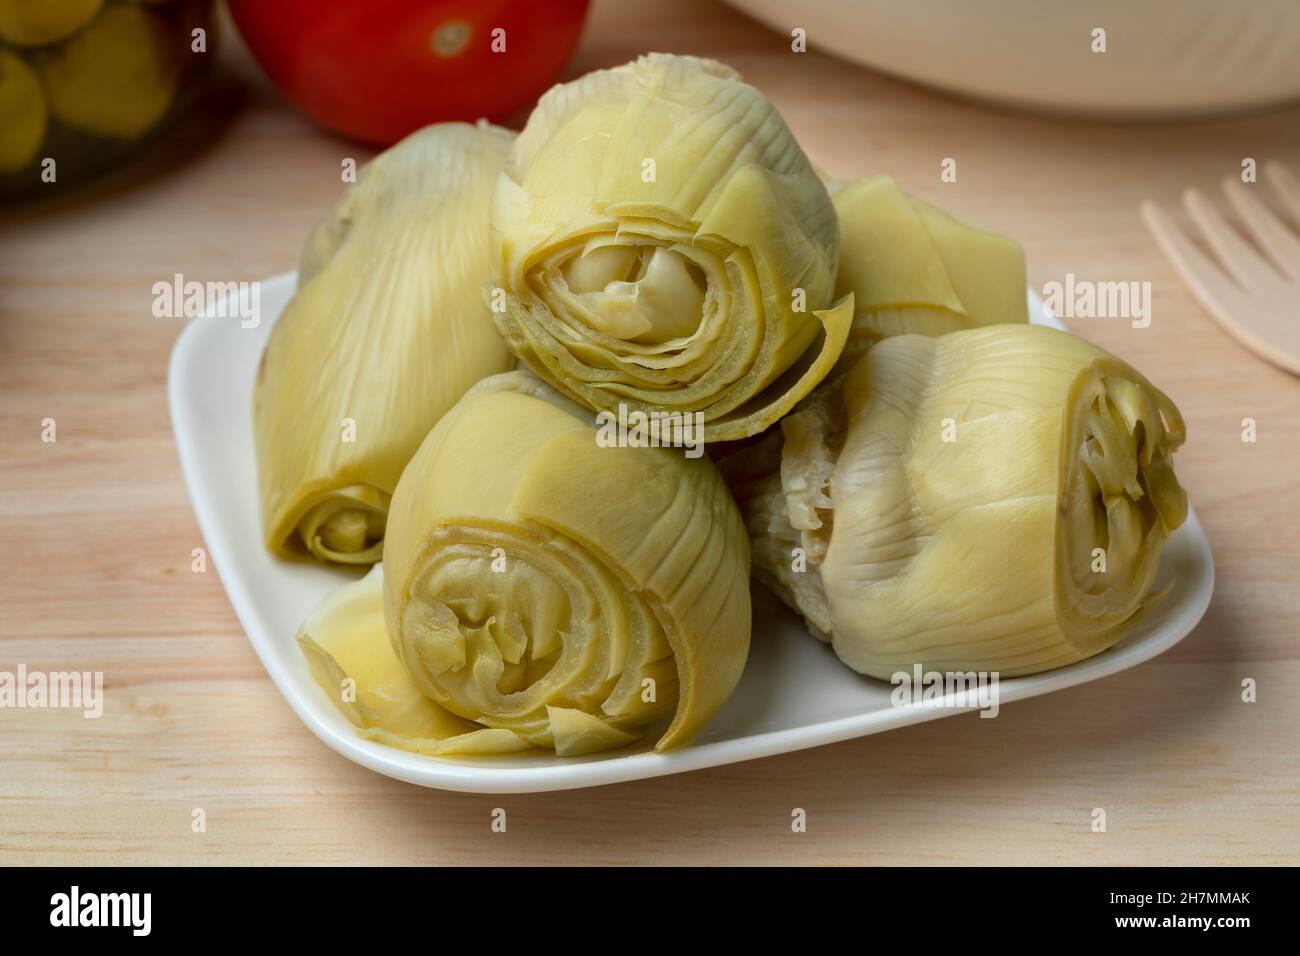 Plate with marinated artichoke hearts close up Stock Photo